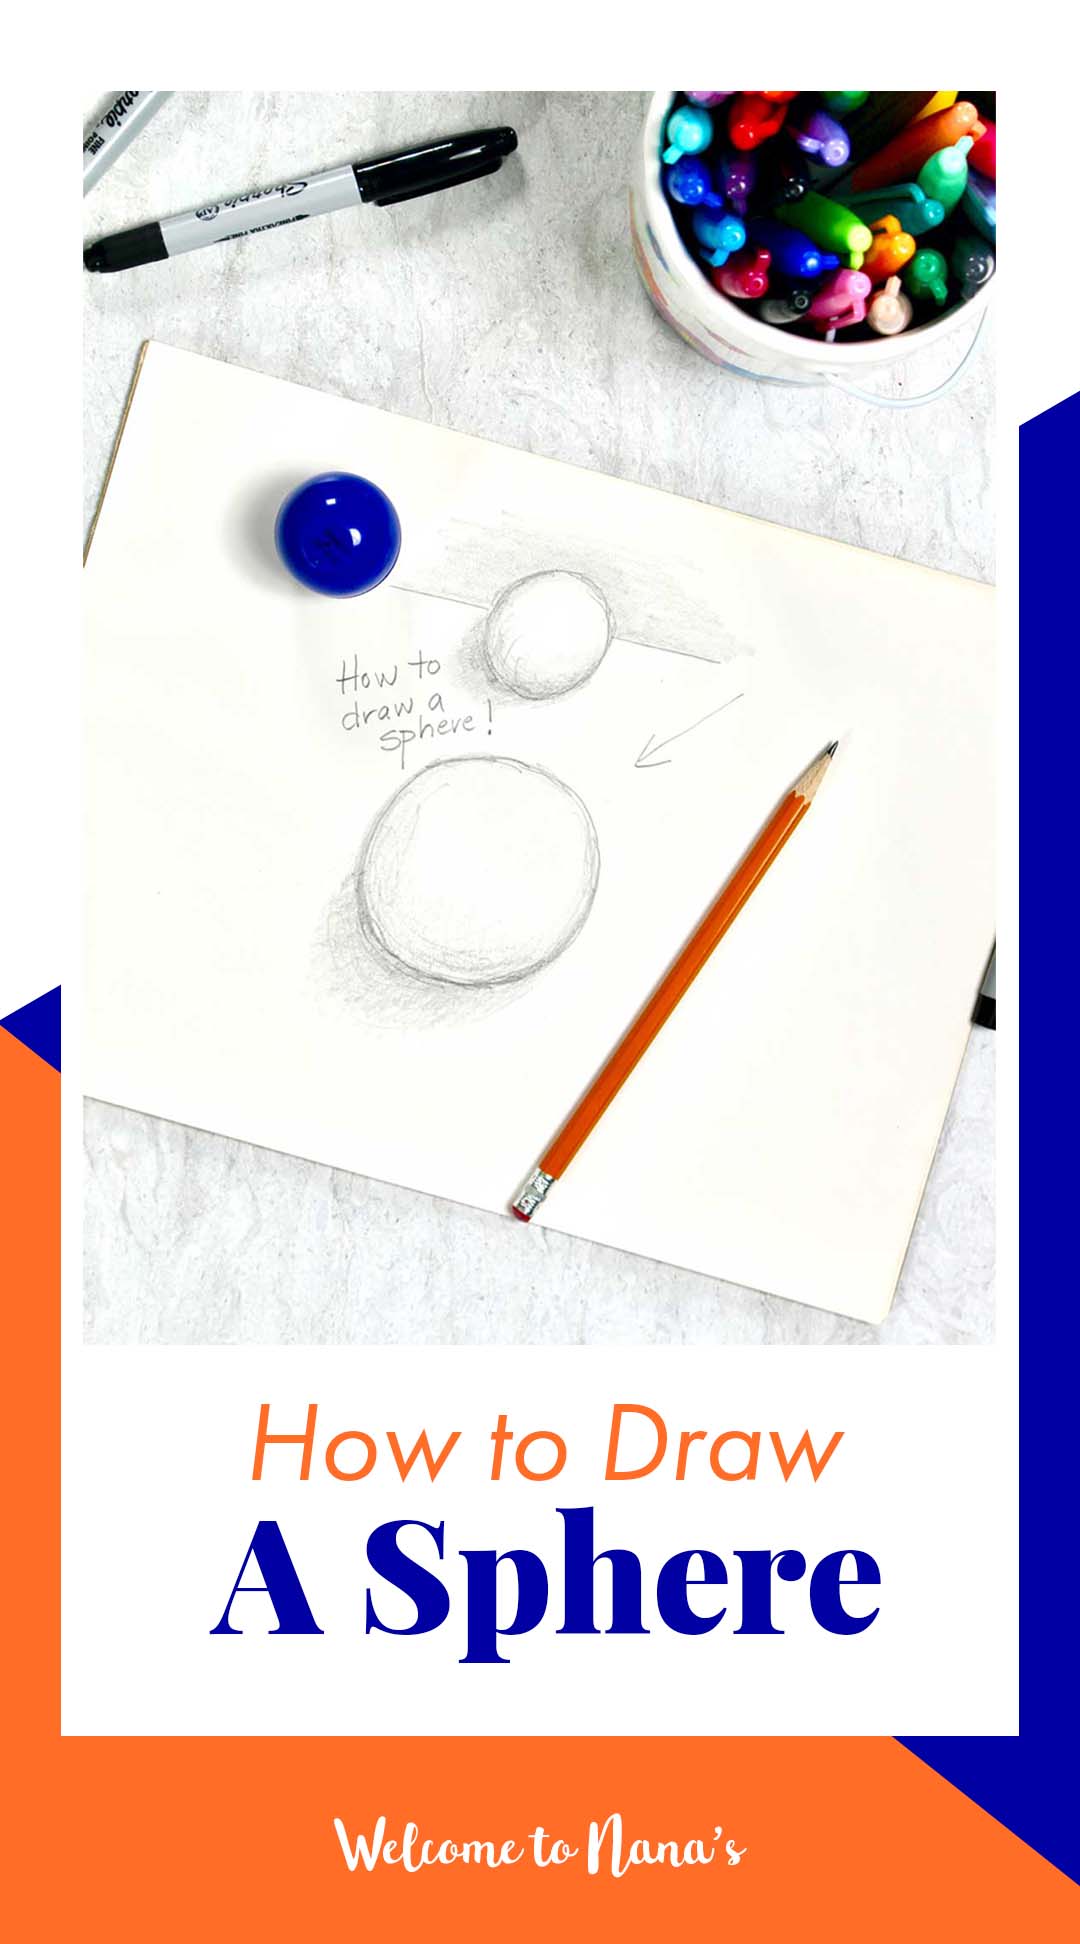 A tutorial pencil drawing of two 3-D spheres, sitting near a pencil and jar of drawing utensils.